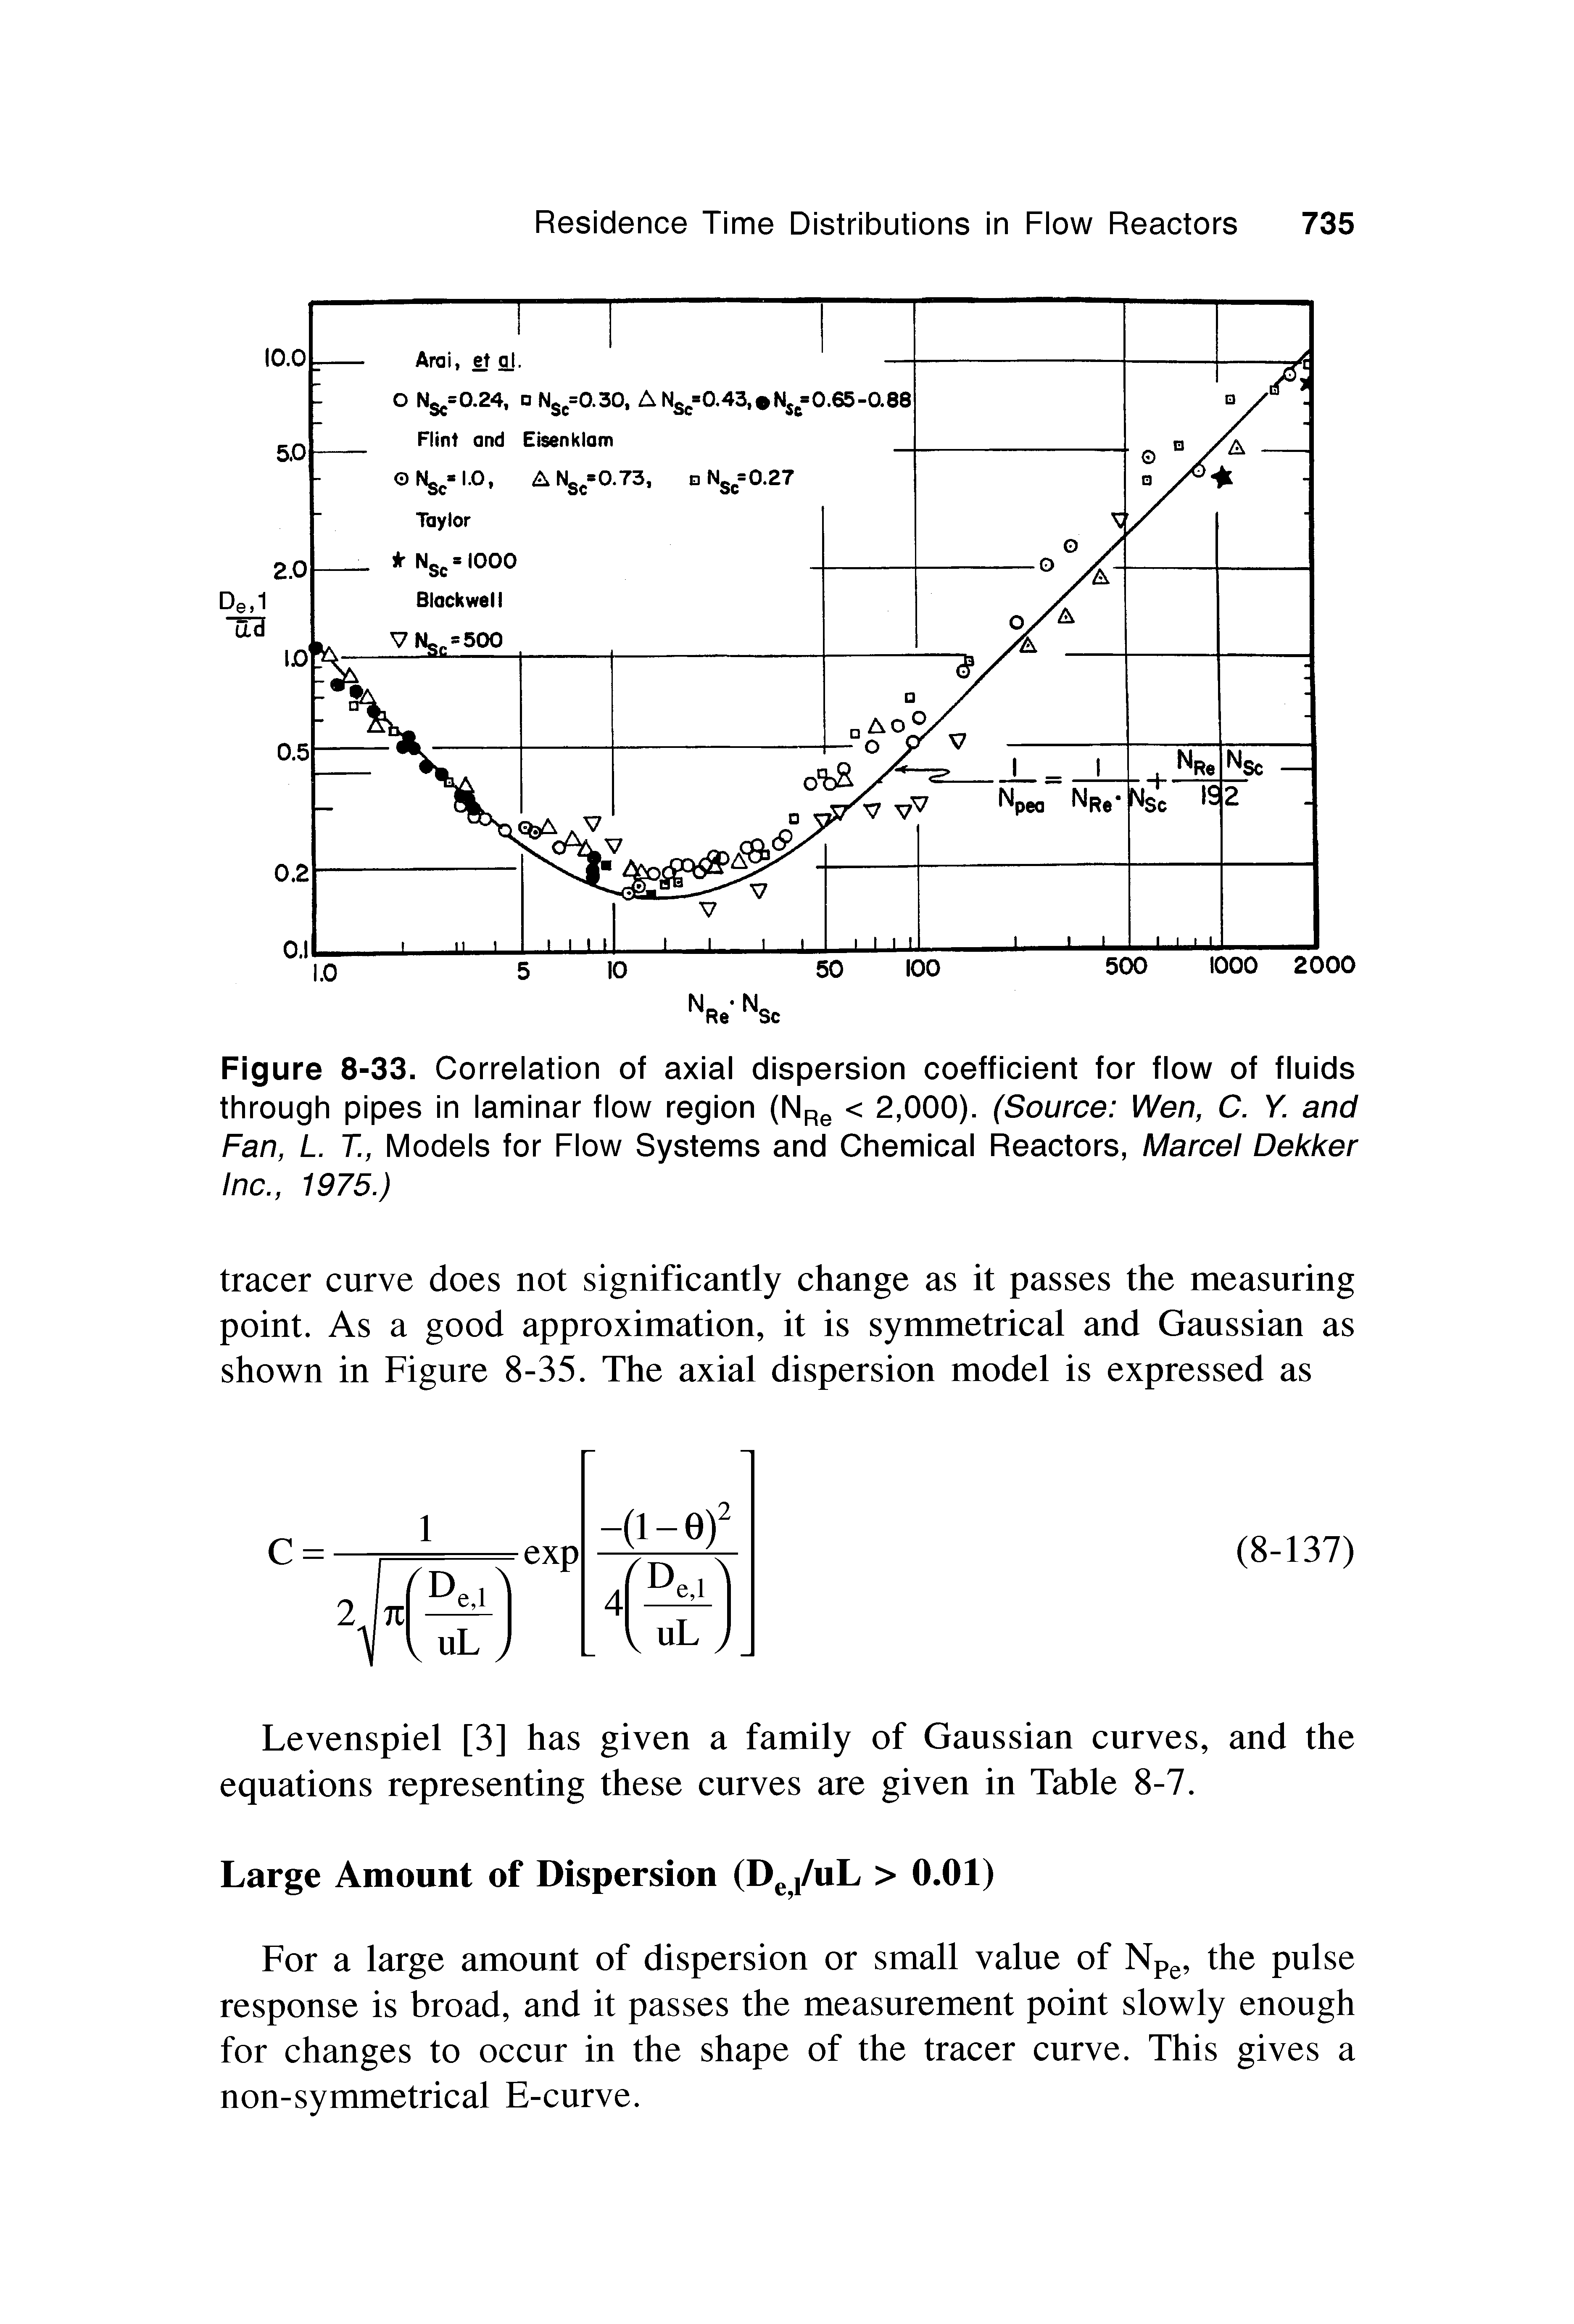 Figure 8-33. Correlation of axial dispersion coefficient for flow of fluids through pipes in laminar flow region (NRe < 2,000). (Source Wen, C. Y. and Fan, L. T, Models for Flow Systems and Chemical Reactors, Marcel Dekker Inc., 1975.)...